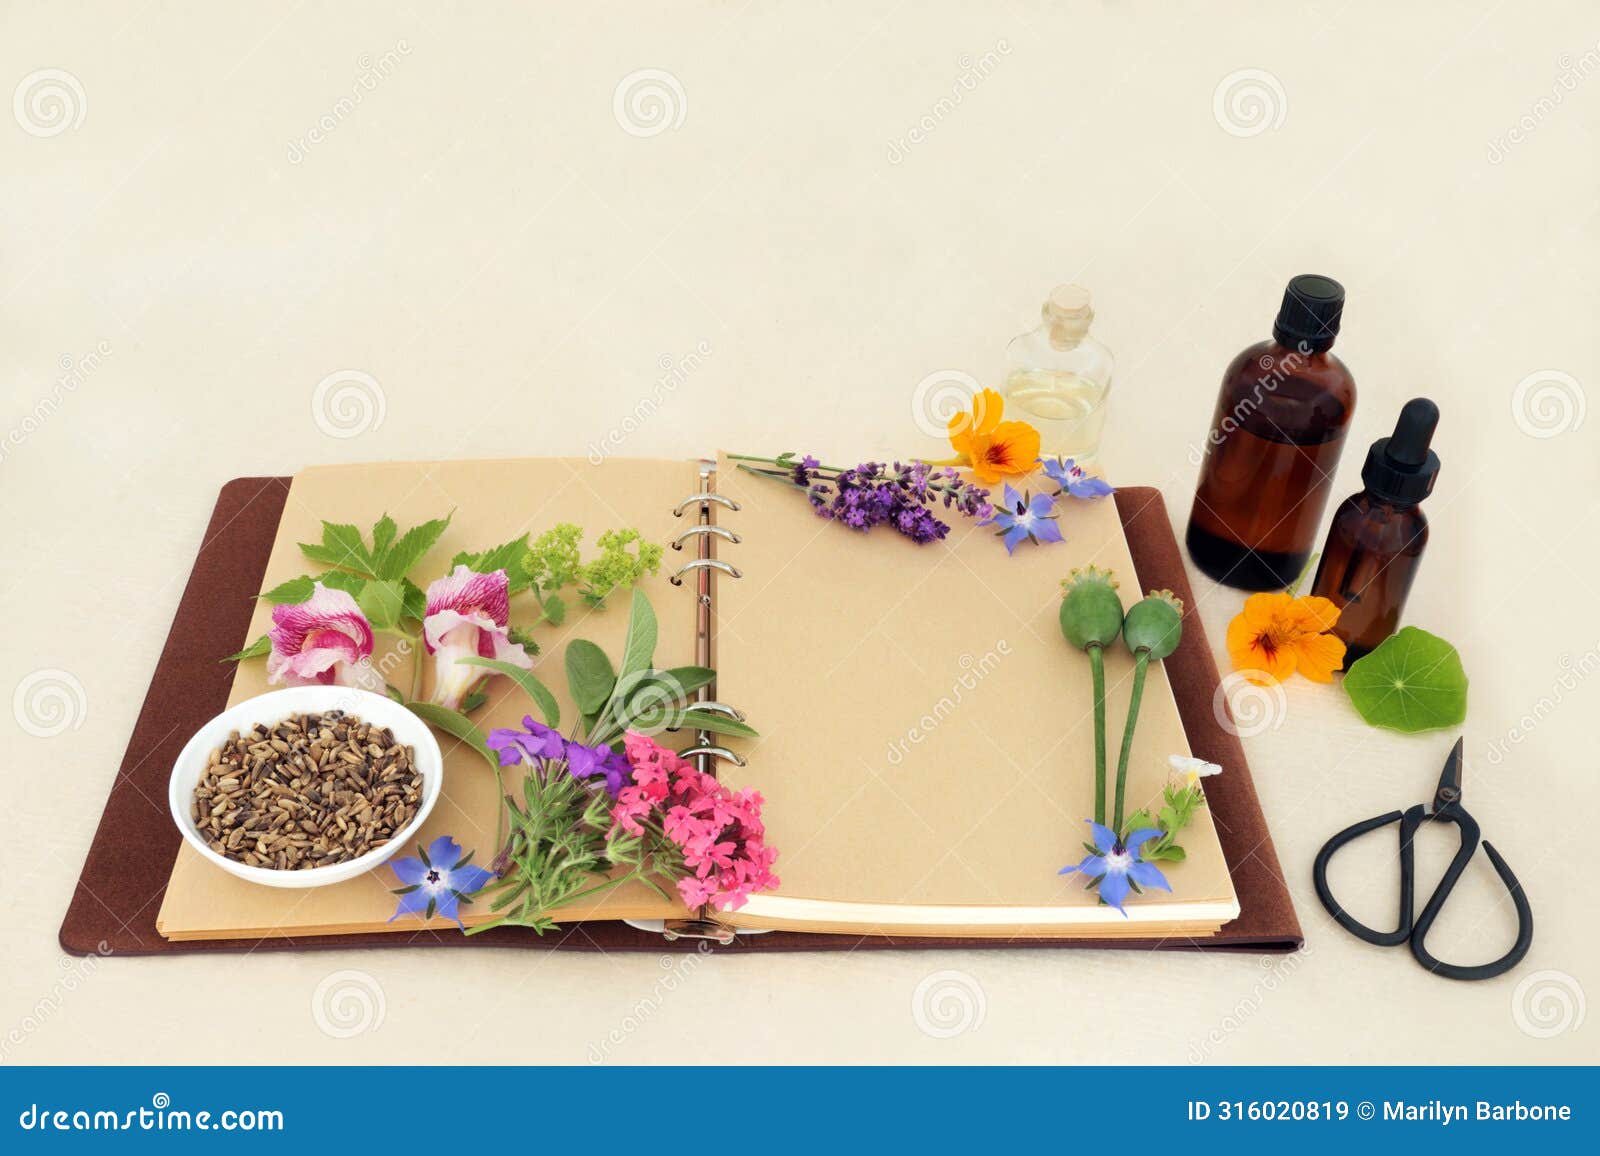 herbal medicine preparation with herbs flowers and essential oil